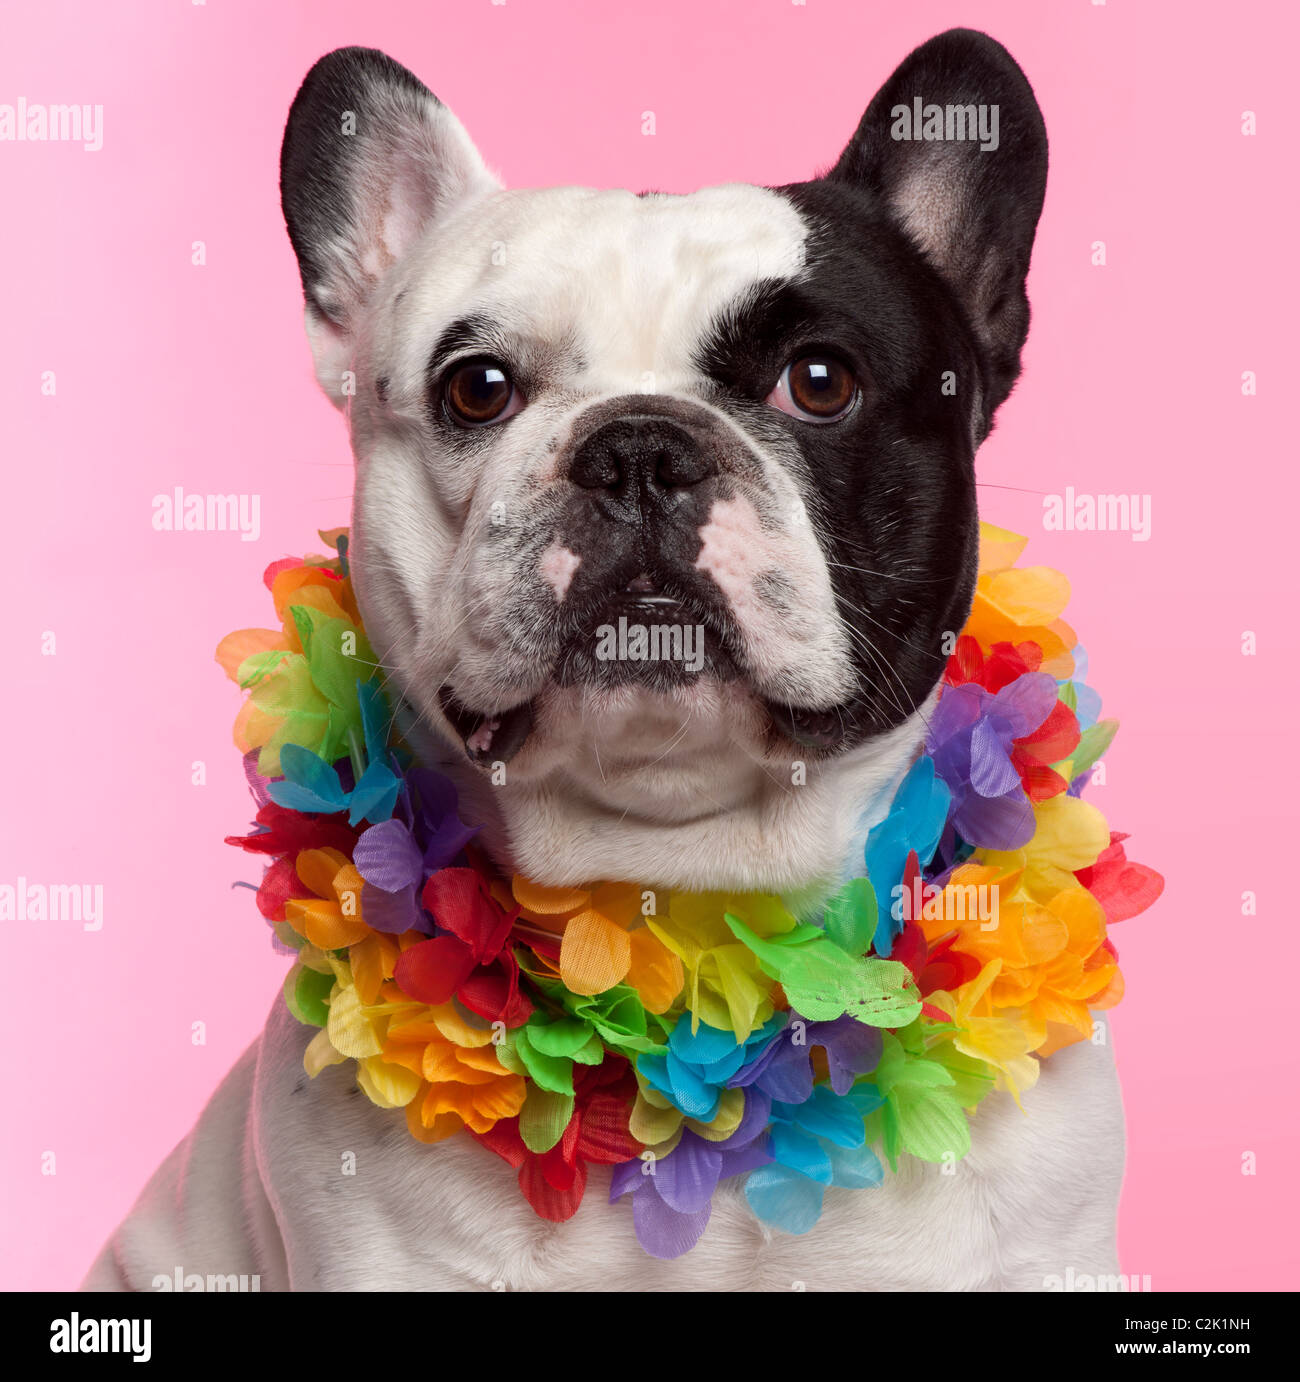 French Bulldog, 3 years old, wearing Hawaiian lei front of pink background Stock Photo